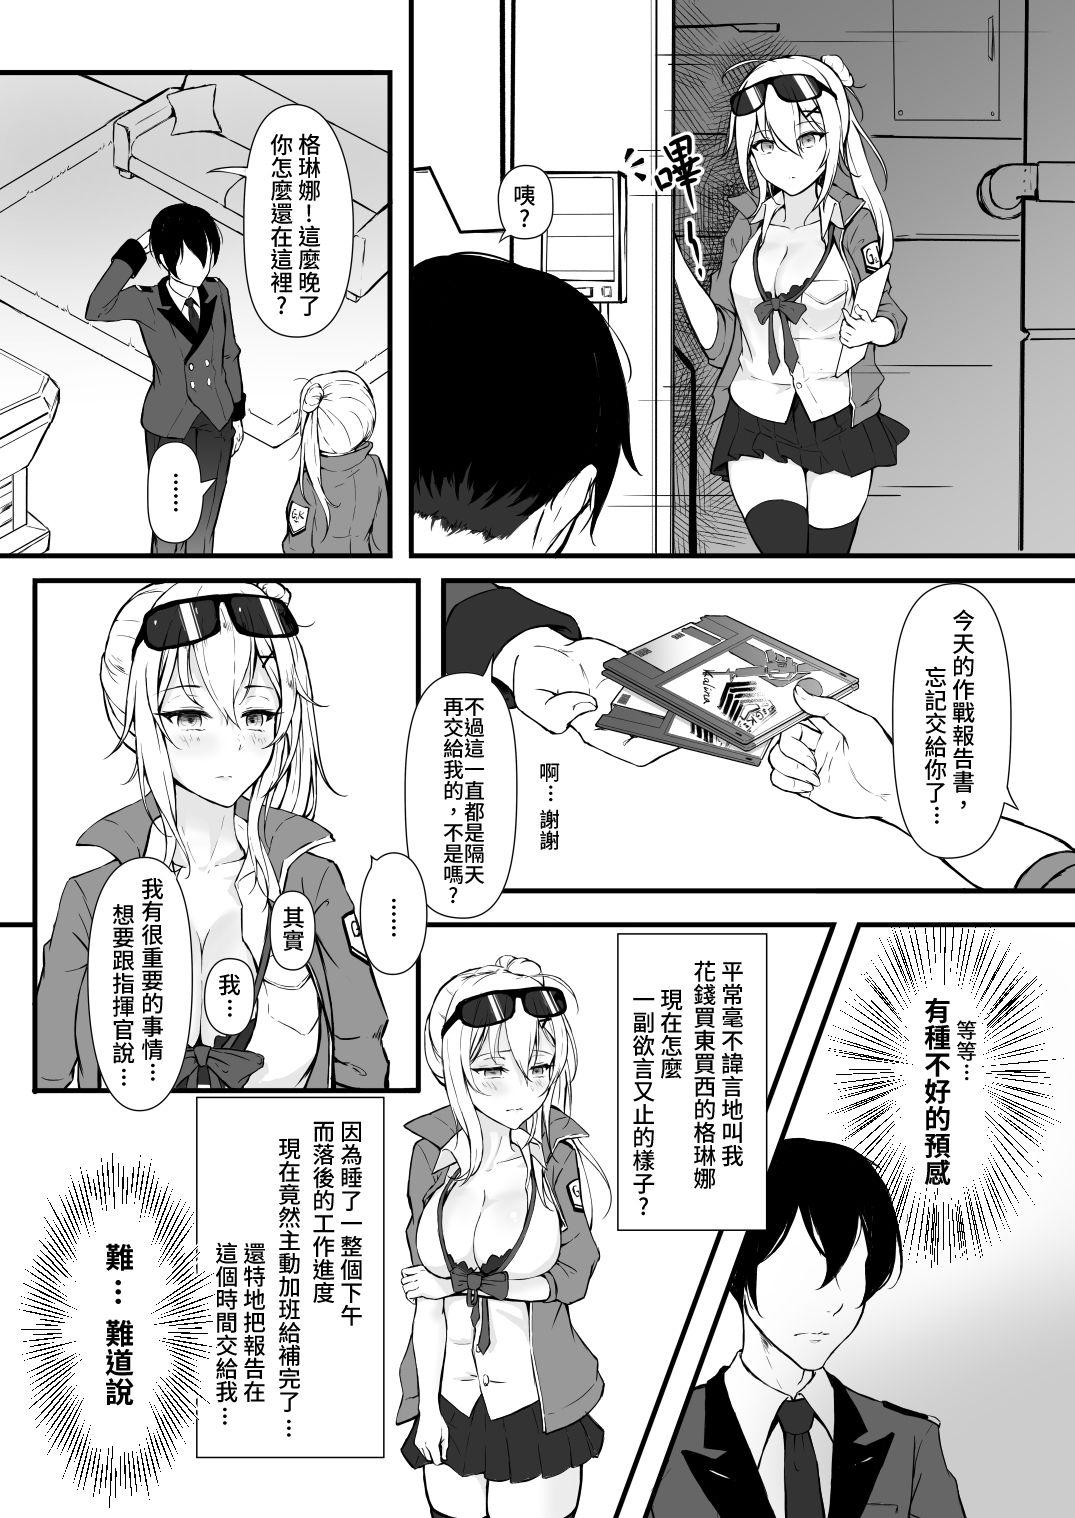 Prima How Many Diamonds a Kiss Worth? - Girls frontline Strap On - Page 7